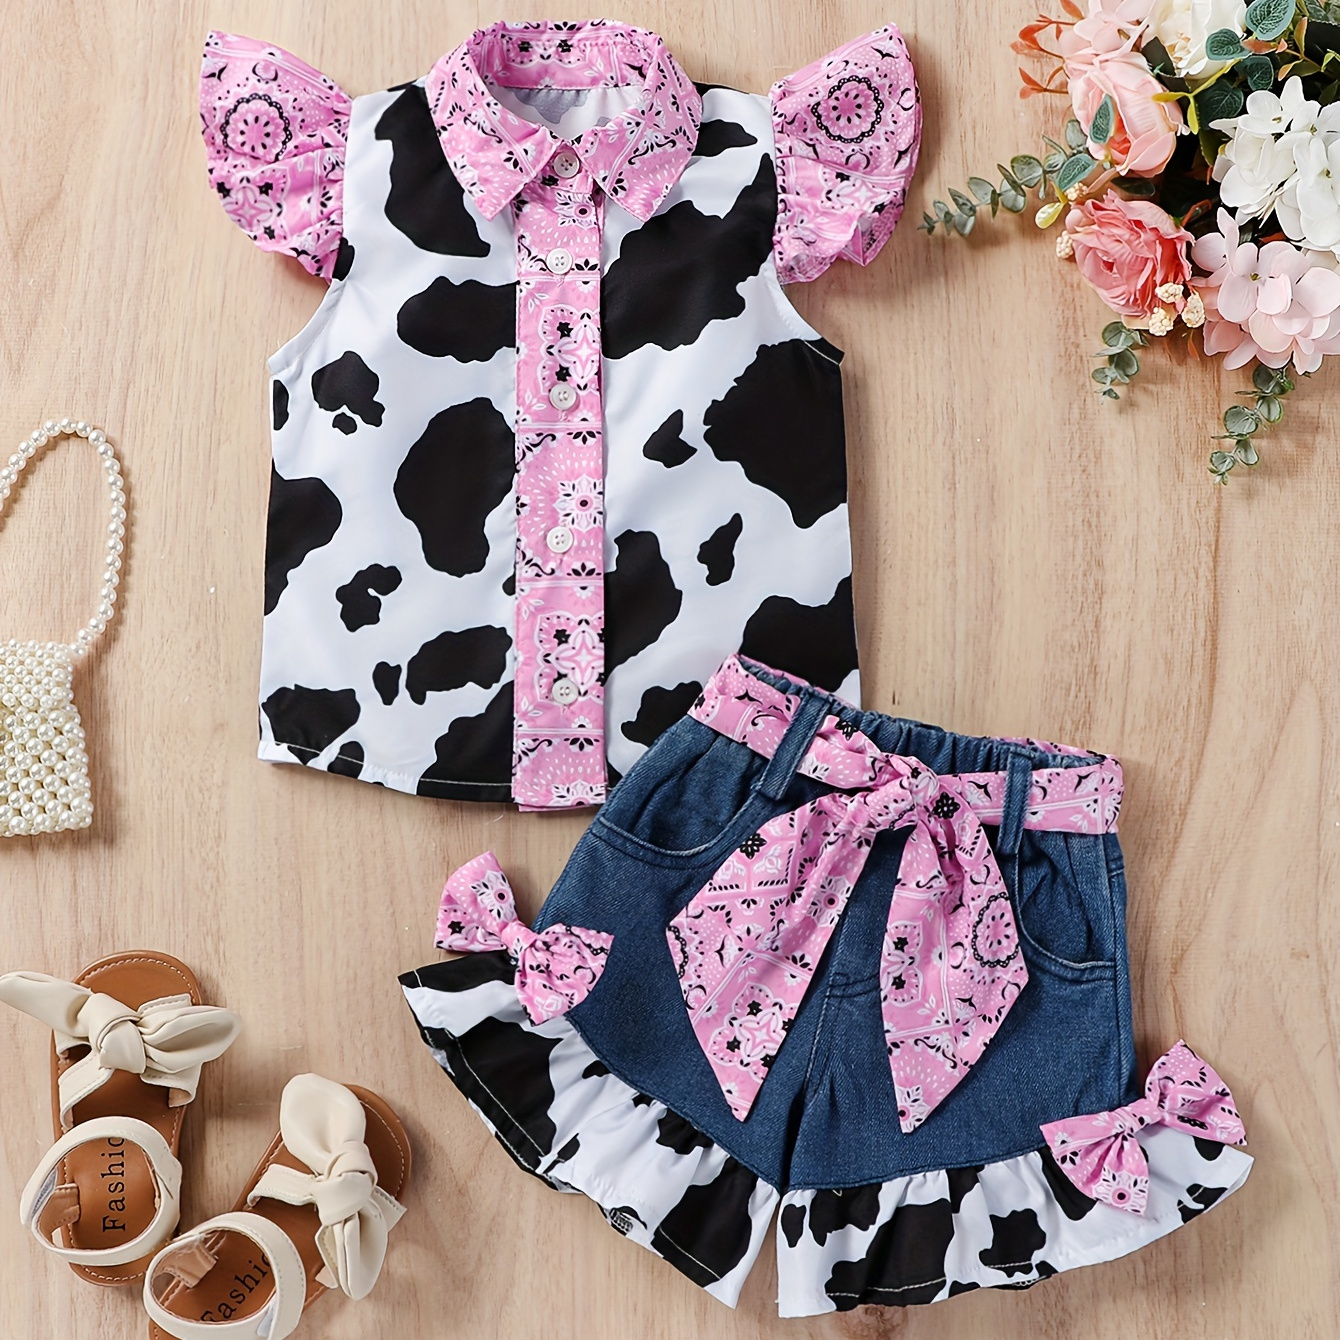 

Baby's Cow Pattern 2pcs Stylish Summer Outfit, Cap Sleeve Blouse & Ruffle Trim Denim Shorts Set, Toddler & Infant Girl's Clothes For Daily/holiday/party